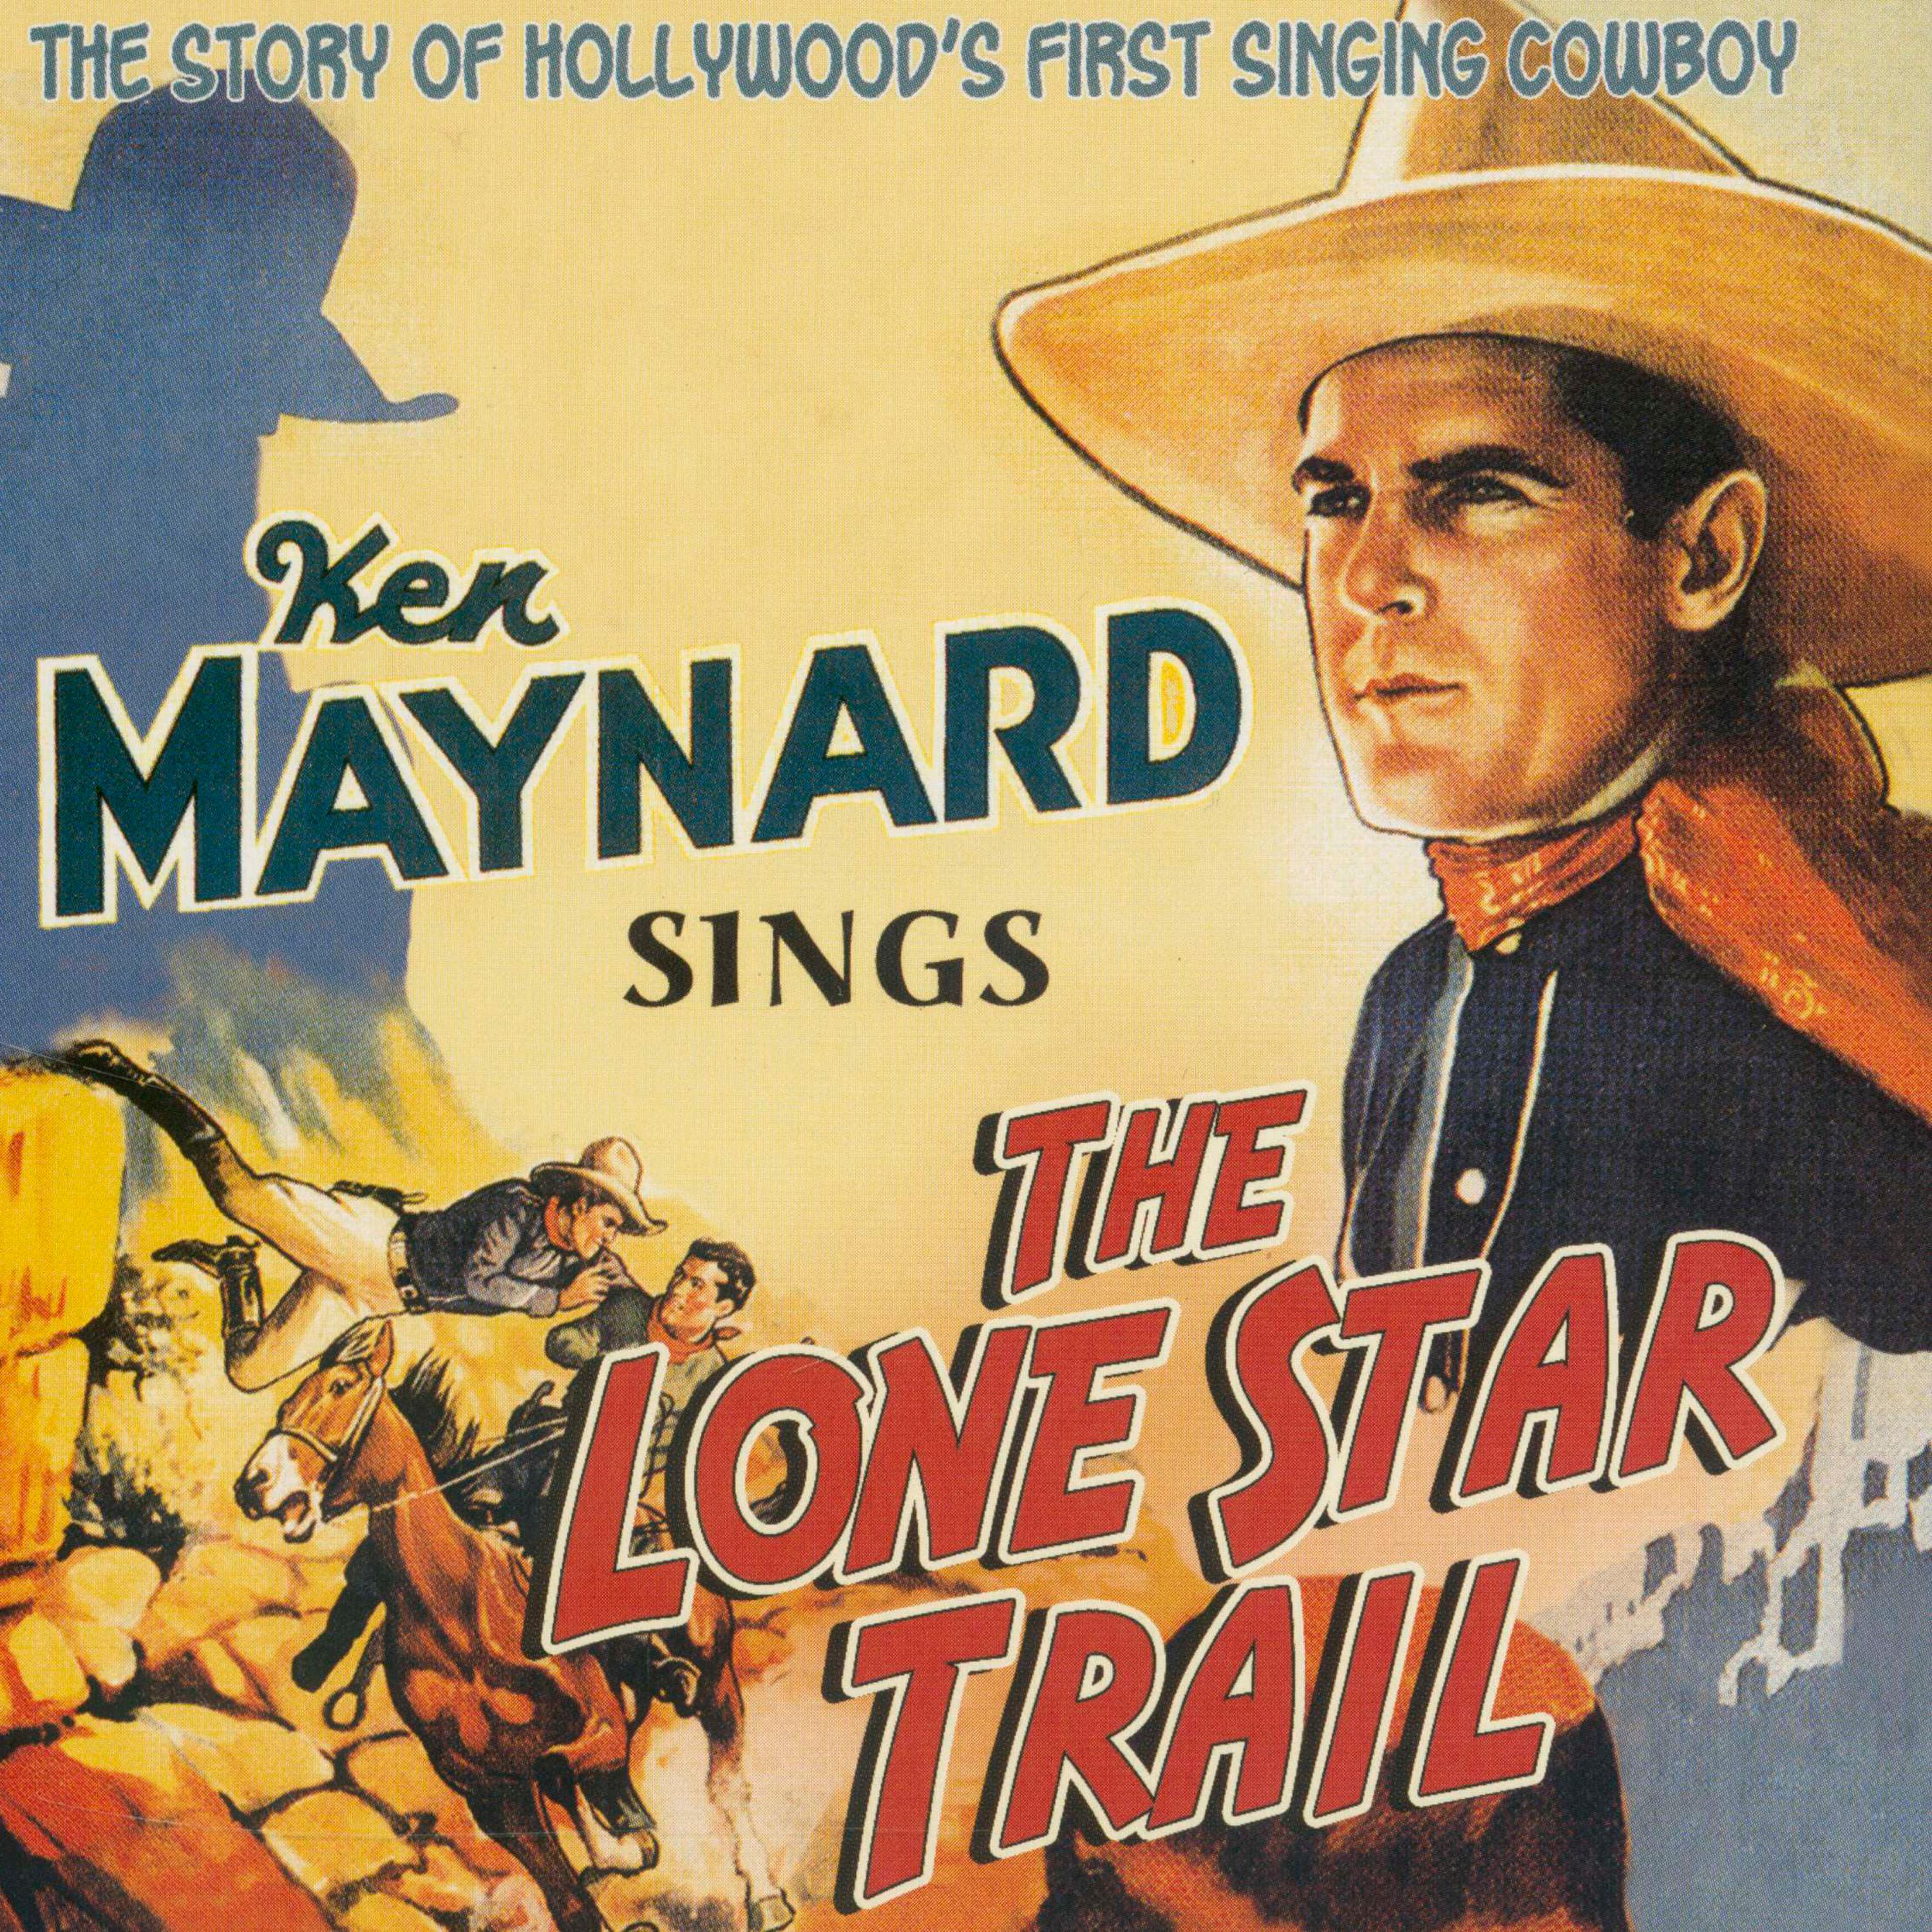 Sings the Lone Star Trail, The Story of Hollywood's First Singing Cowboy